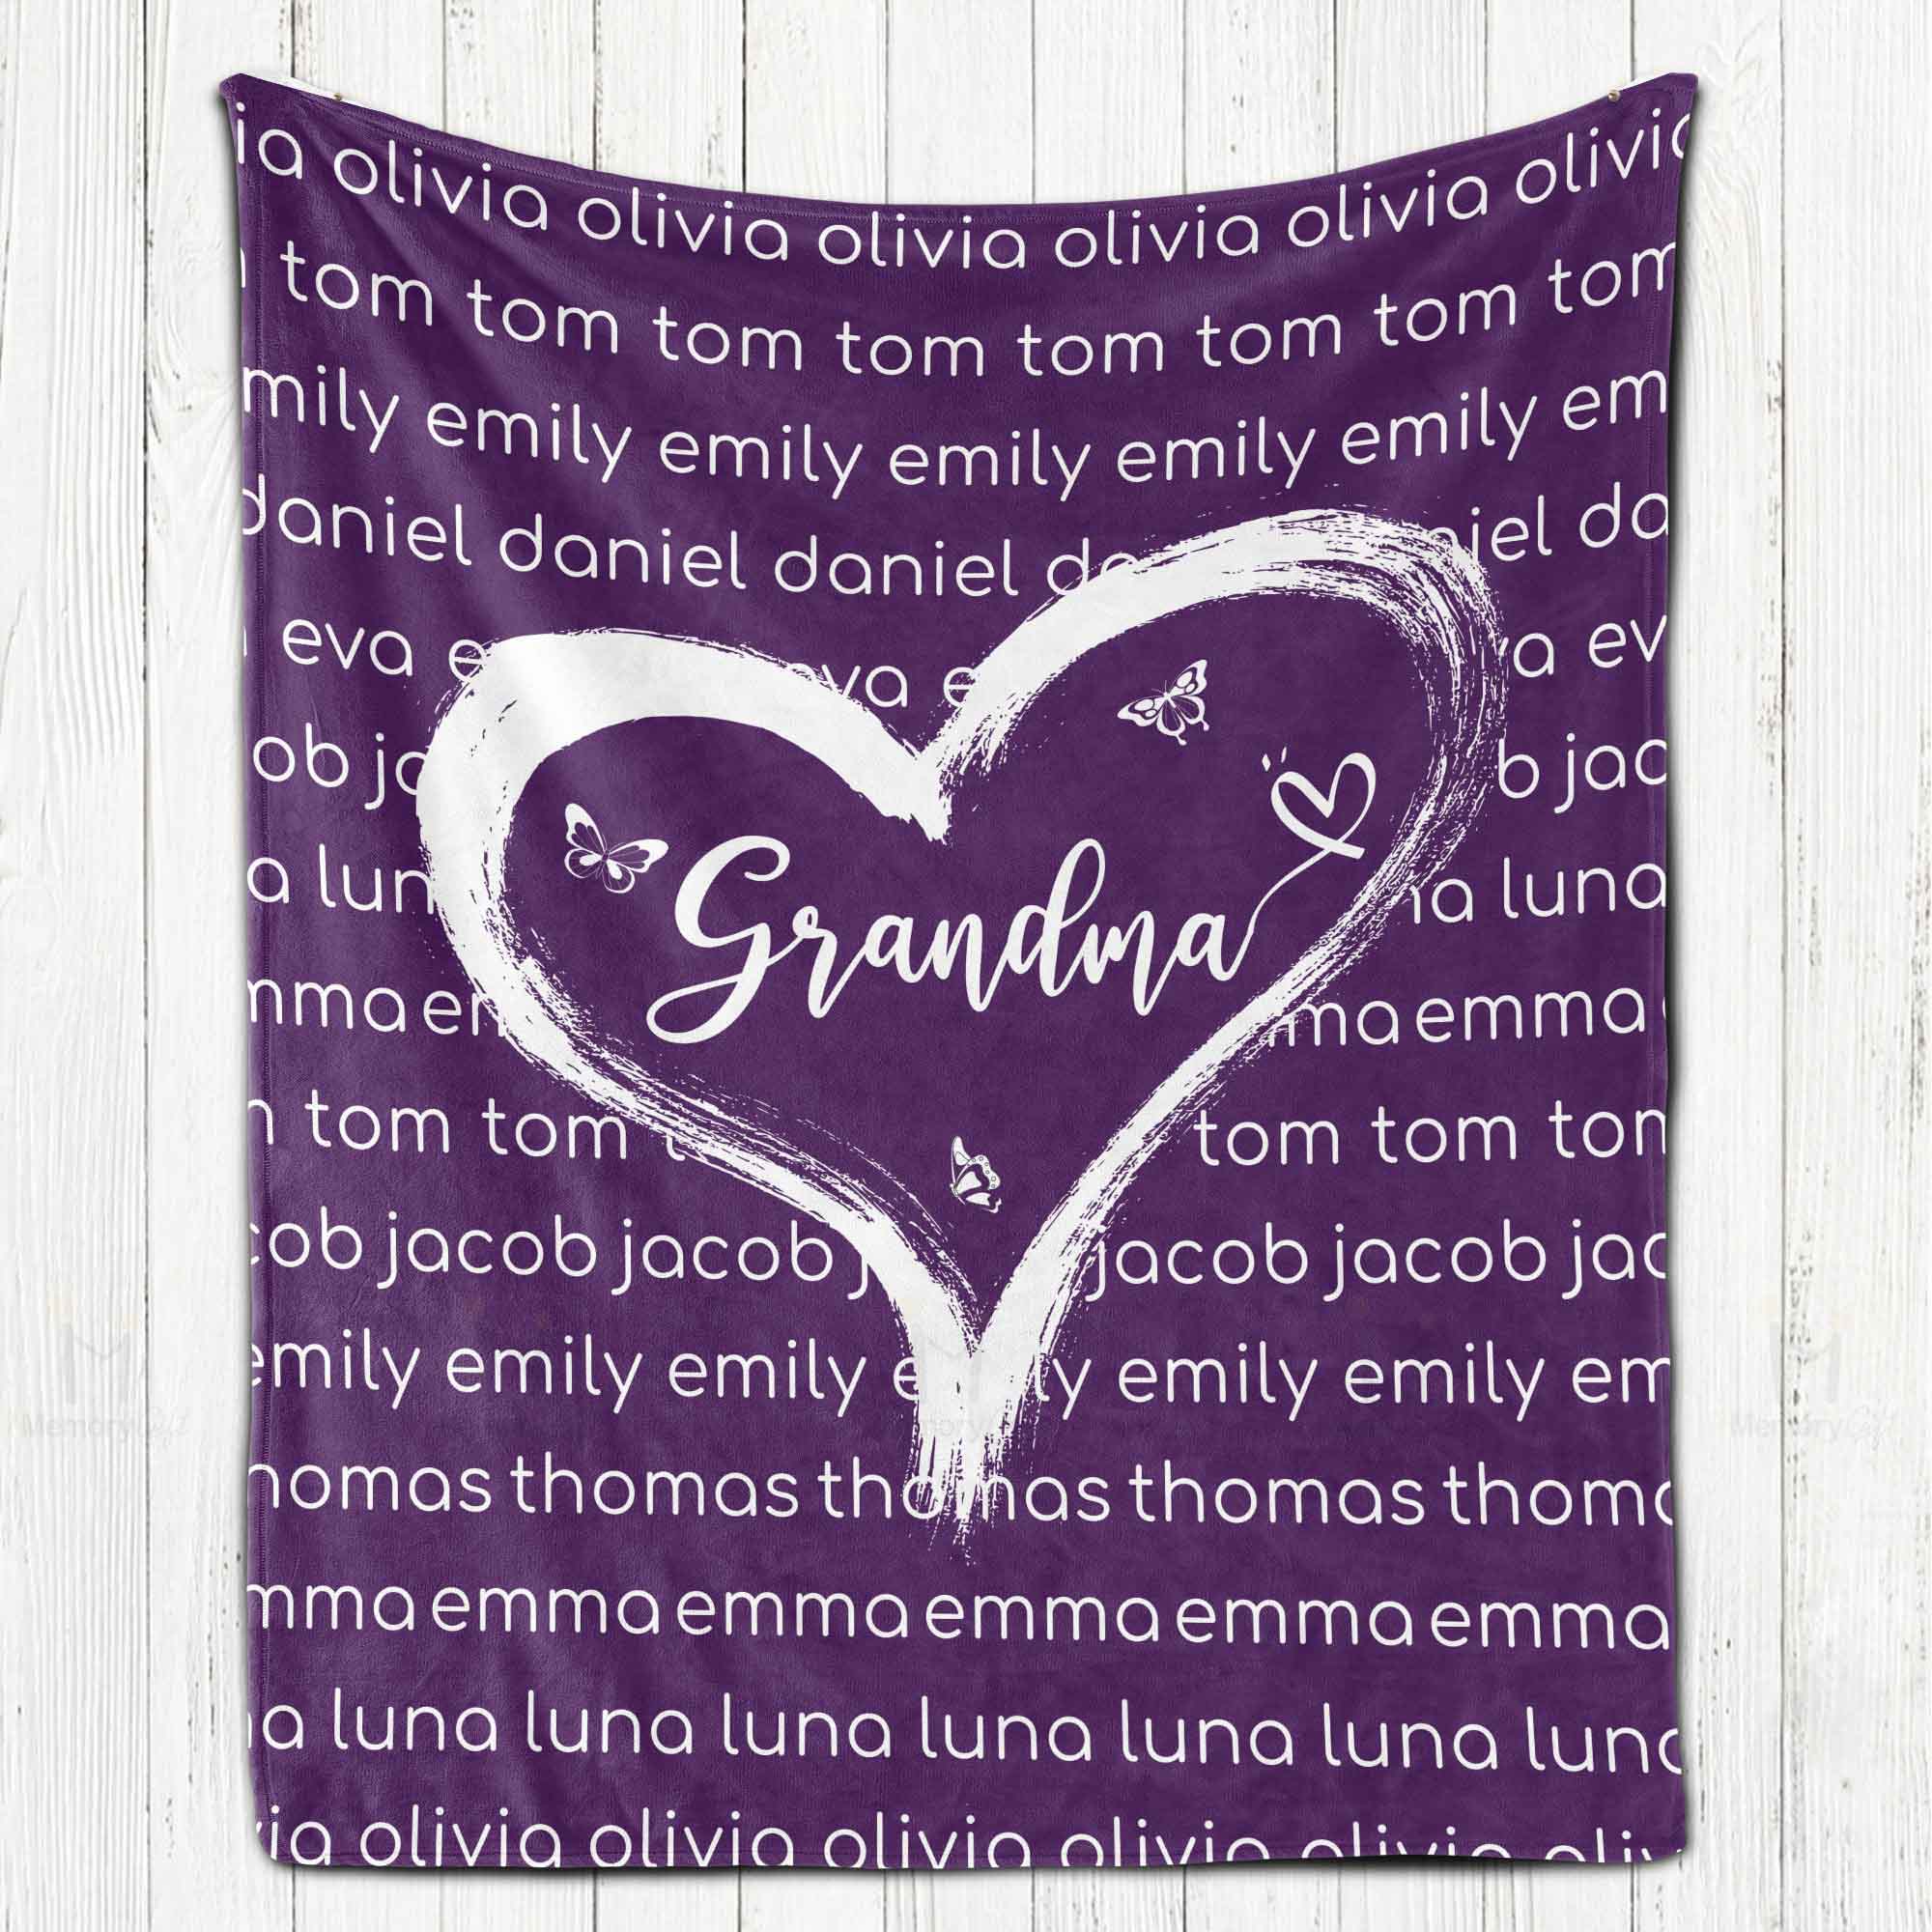 personalized blankets for grandma